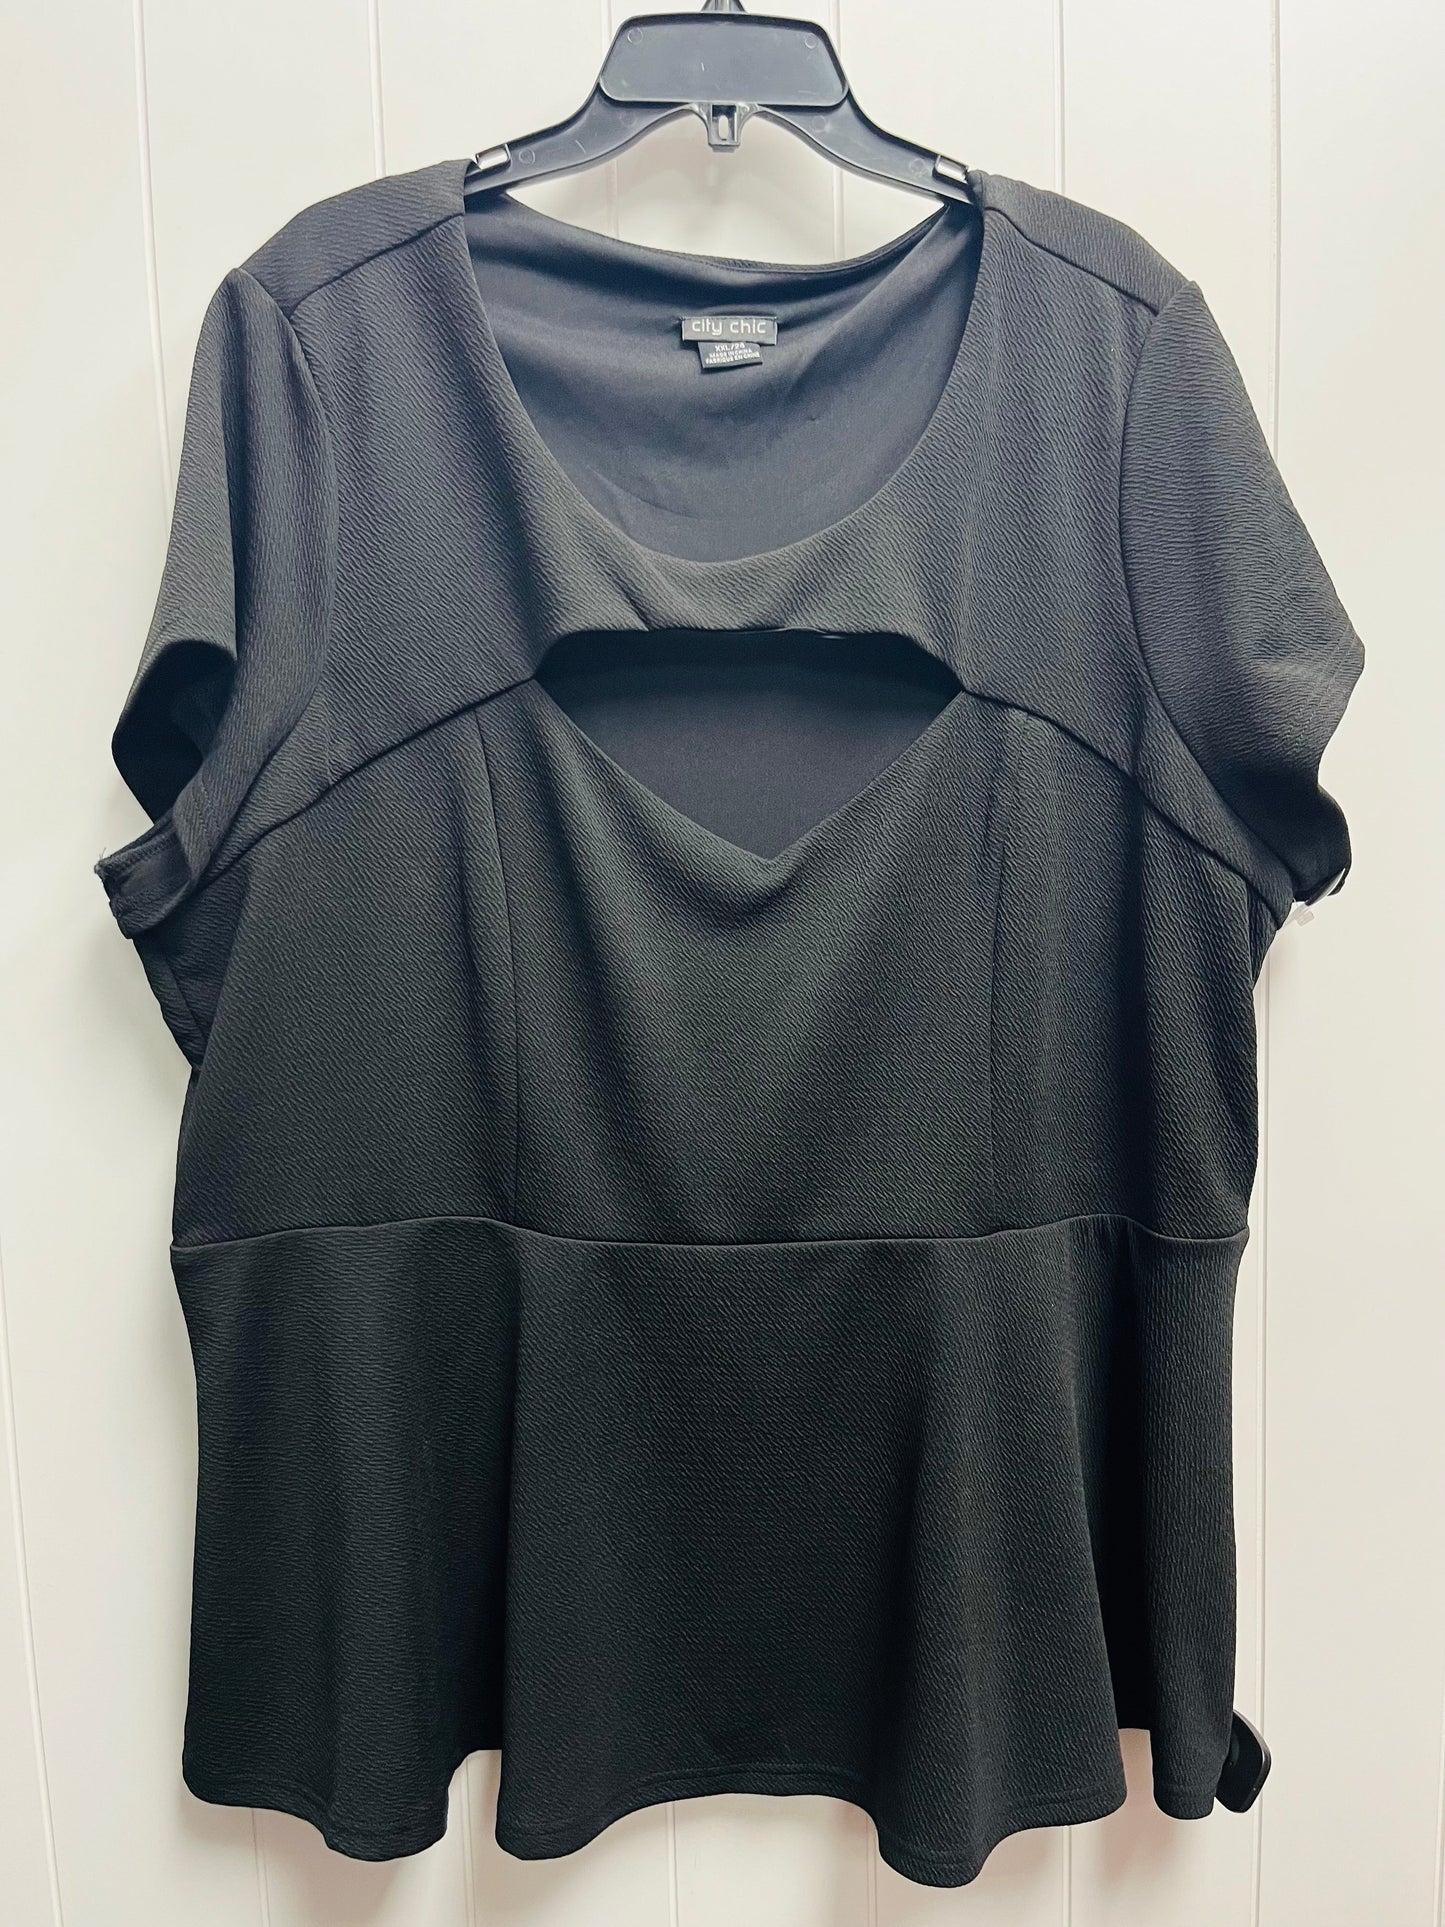 Black Top Short Sleeve City Chic, Size 24